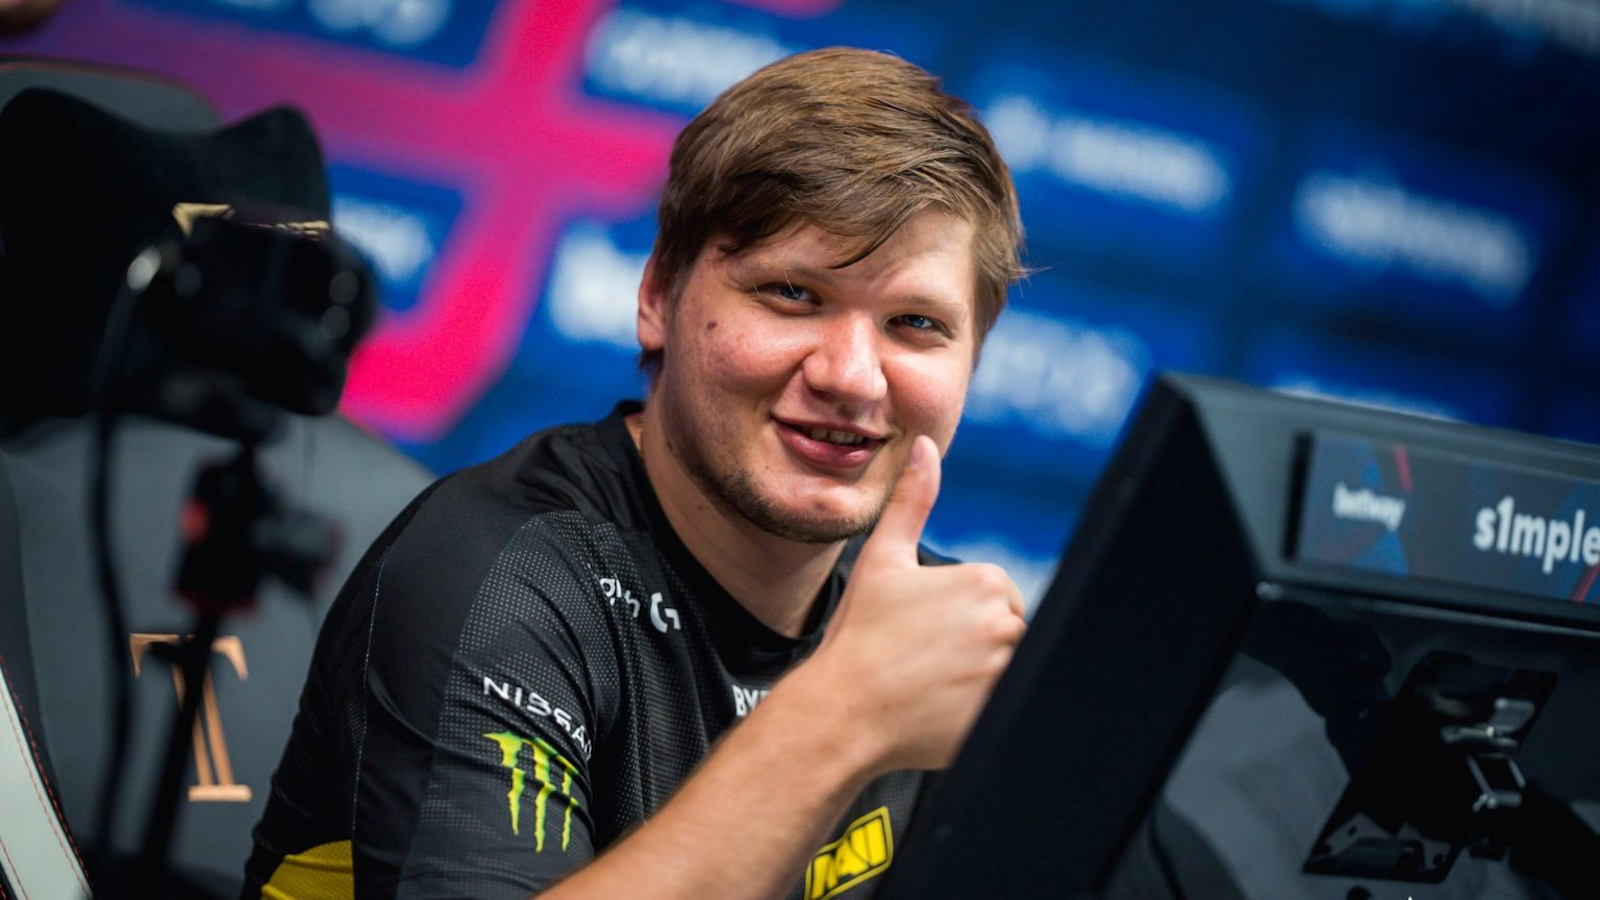 S1mple crushes FaZe’s push for IEM Cologne repeat